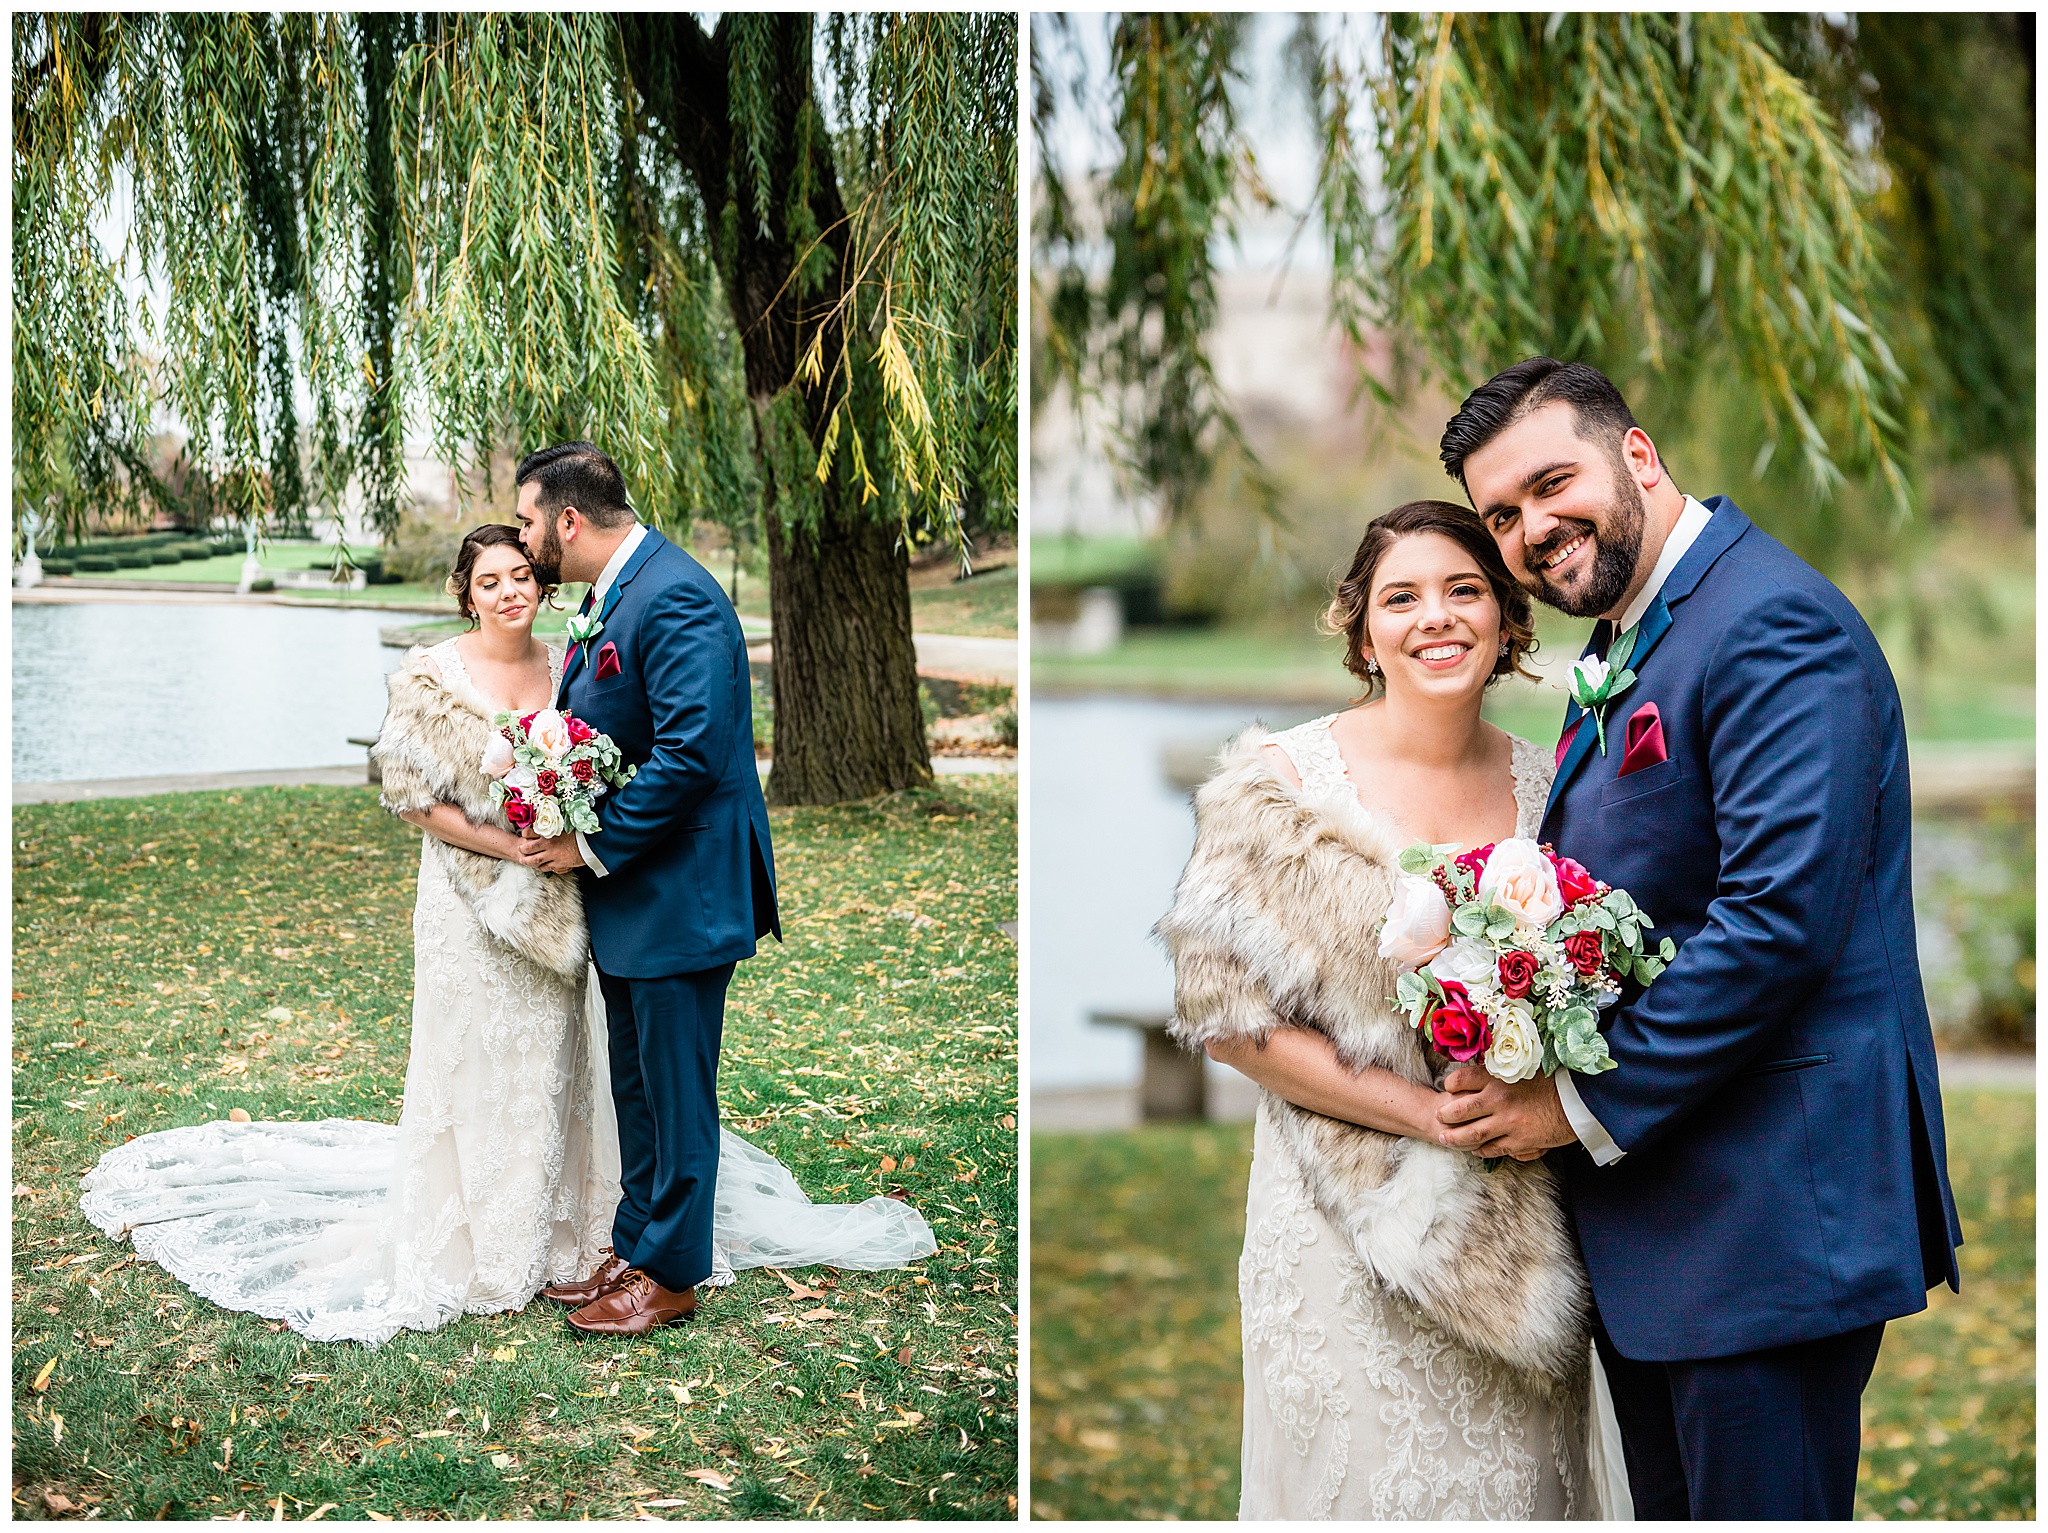 BRIDE AND GROOM UNDER A WEEPING WILLOW